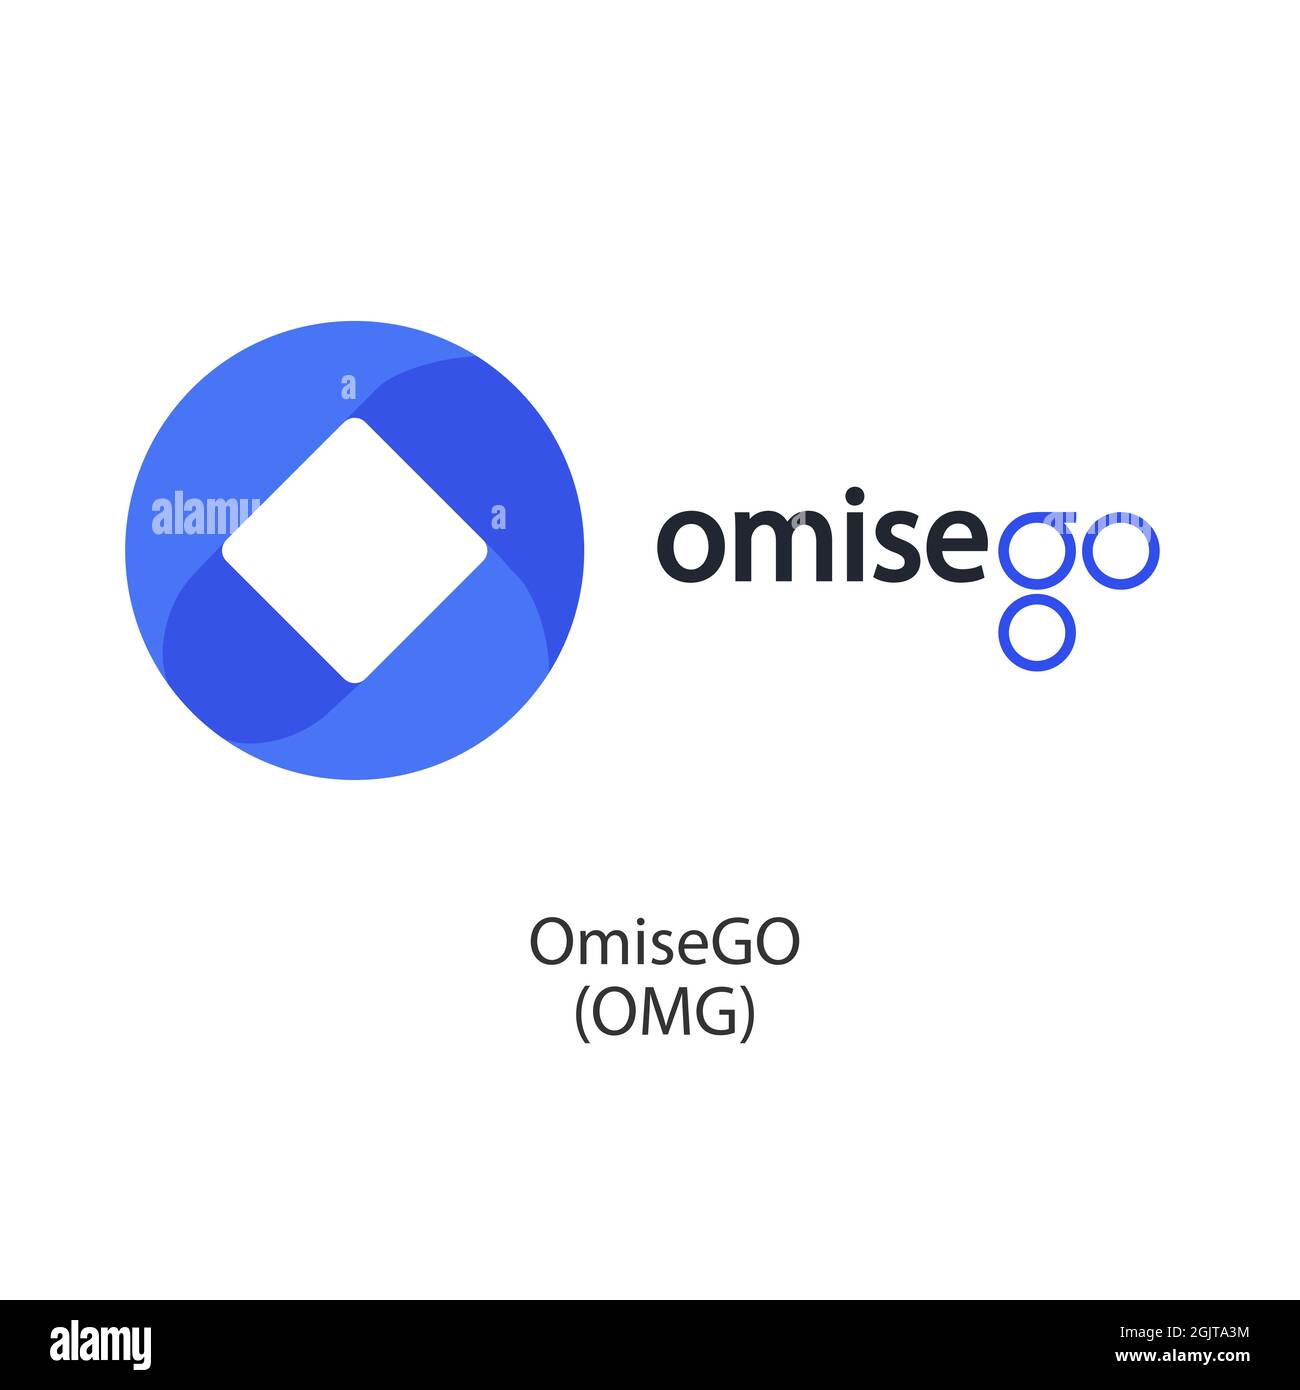 What Is OmiseGO (OMG)?